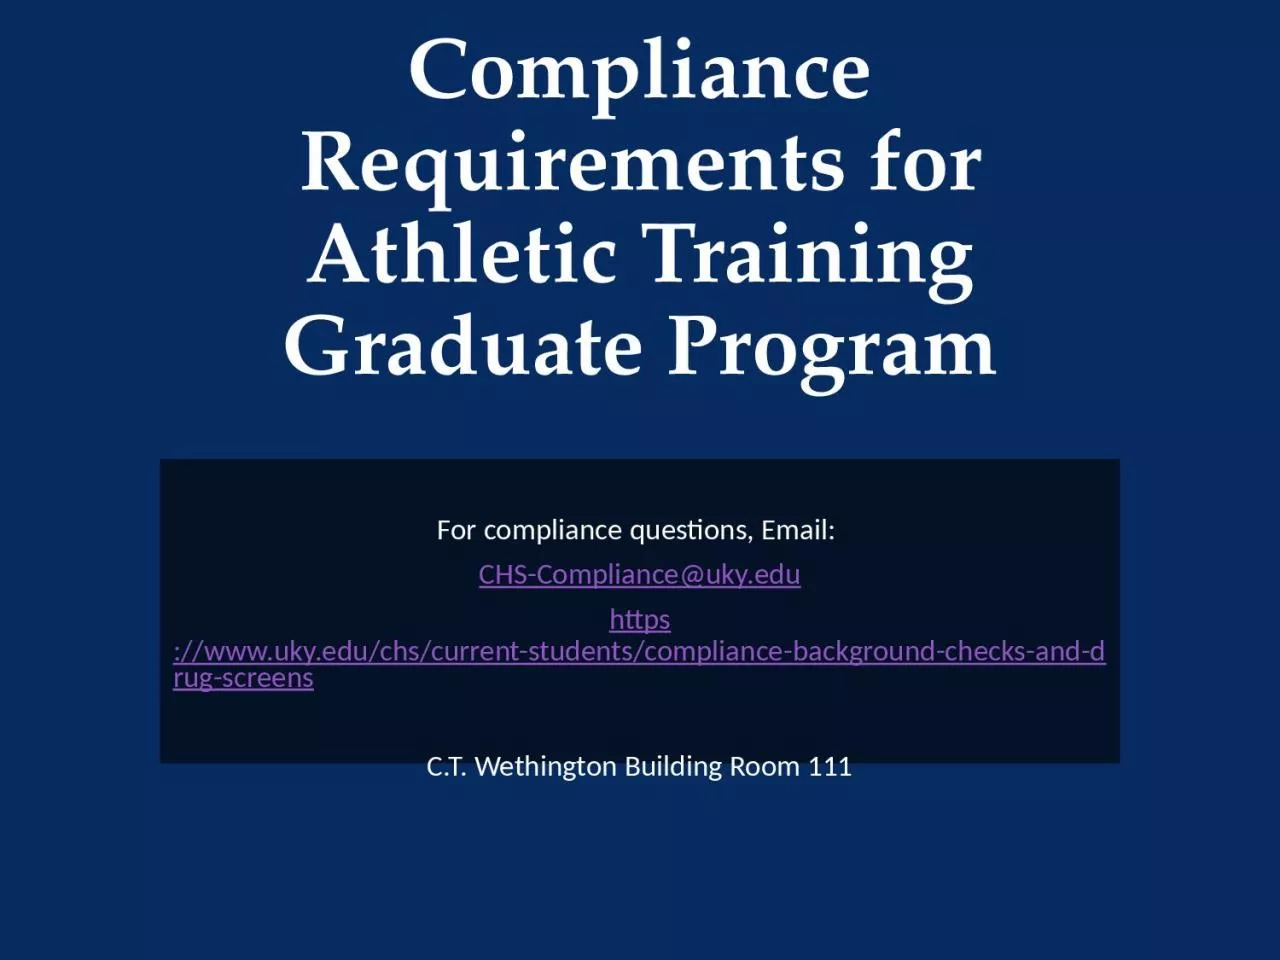 Compliance Requirements for Athletic Training Graduate Program